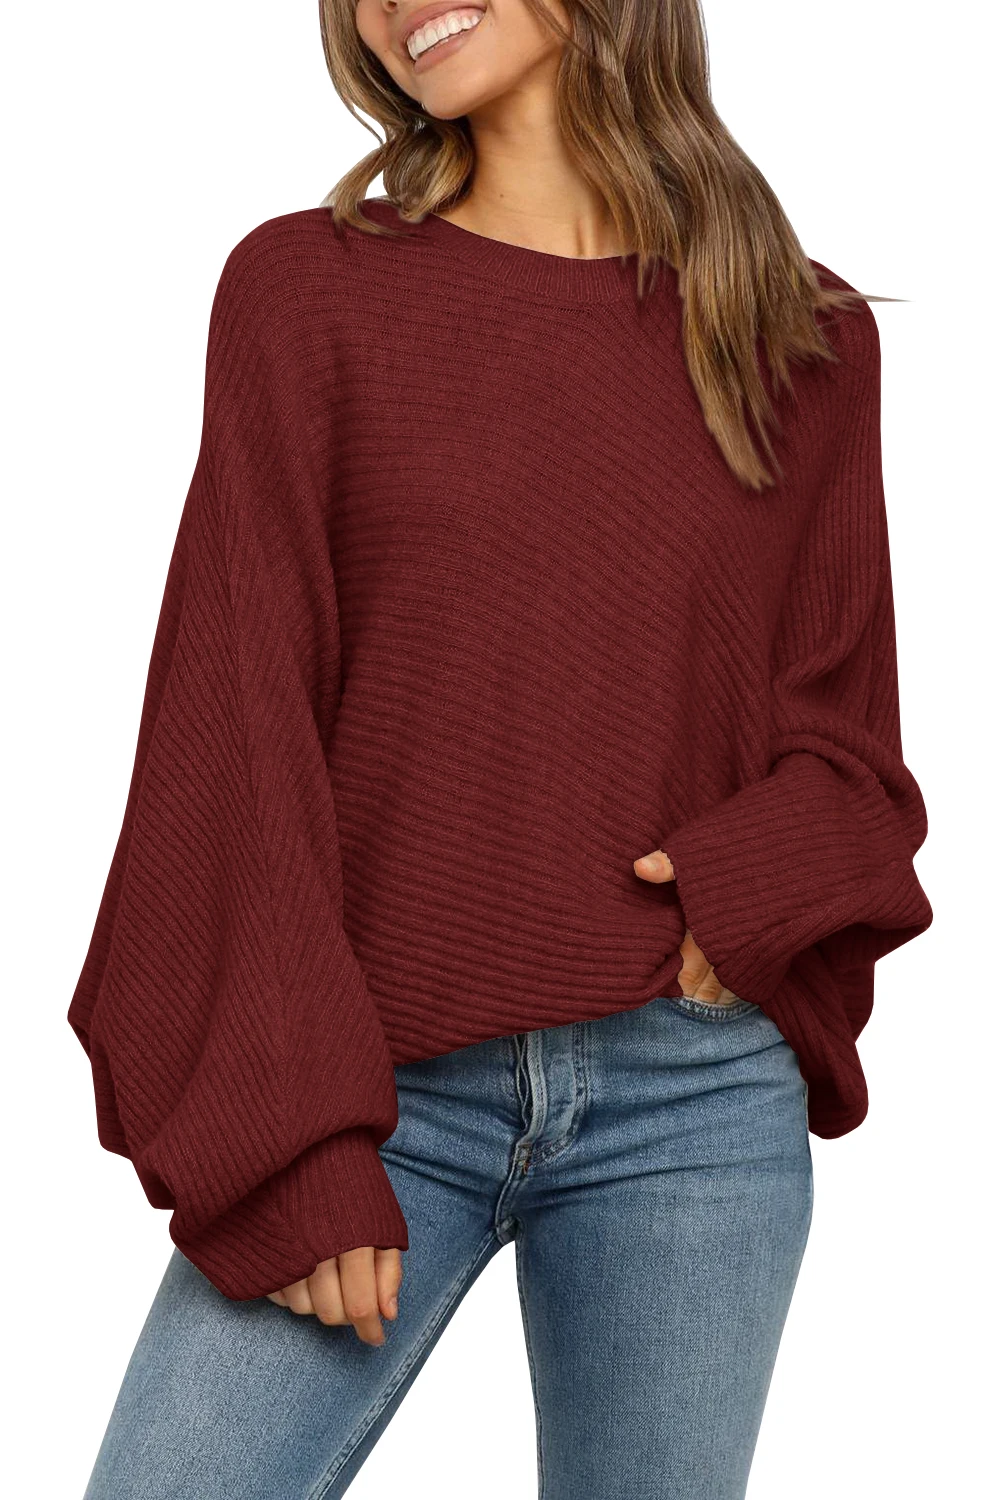 

NEW Women's Oversized Crewneck Sweater Batwing Puff Long Sleeve Cable Slouchy Pullover Jumper Tops